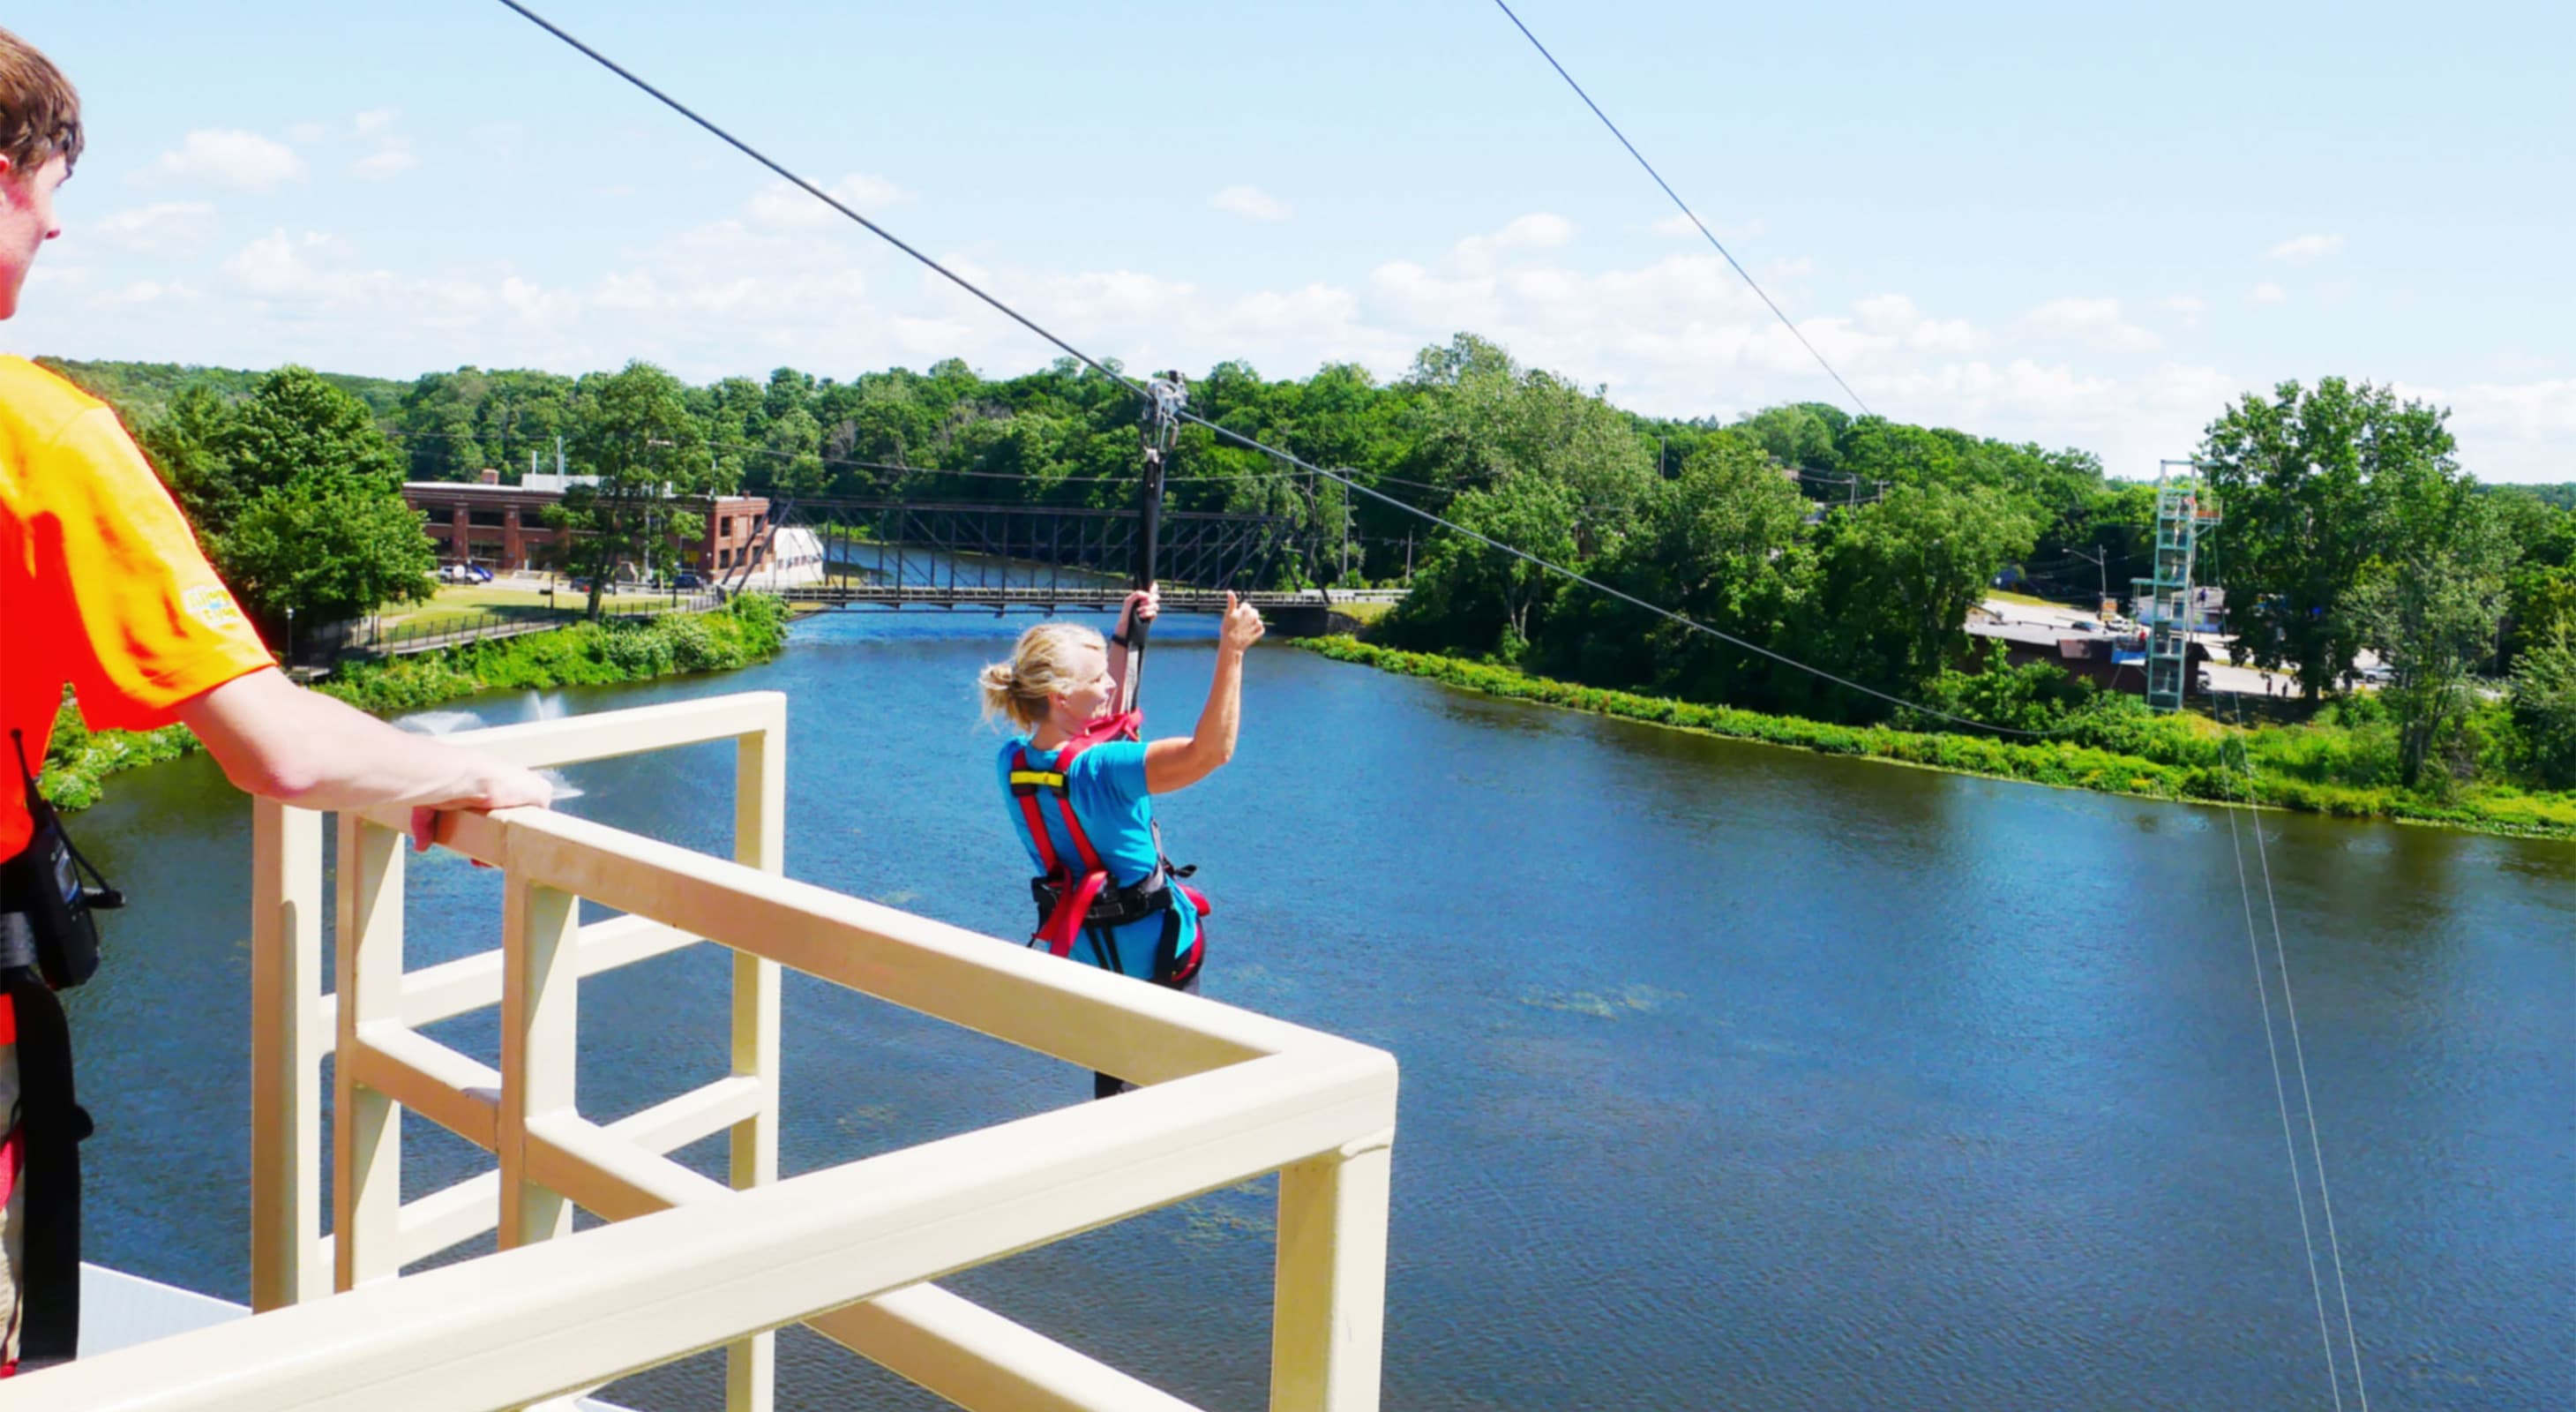 Woman takes off from a platform on a zipline in Allegan